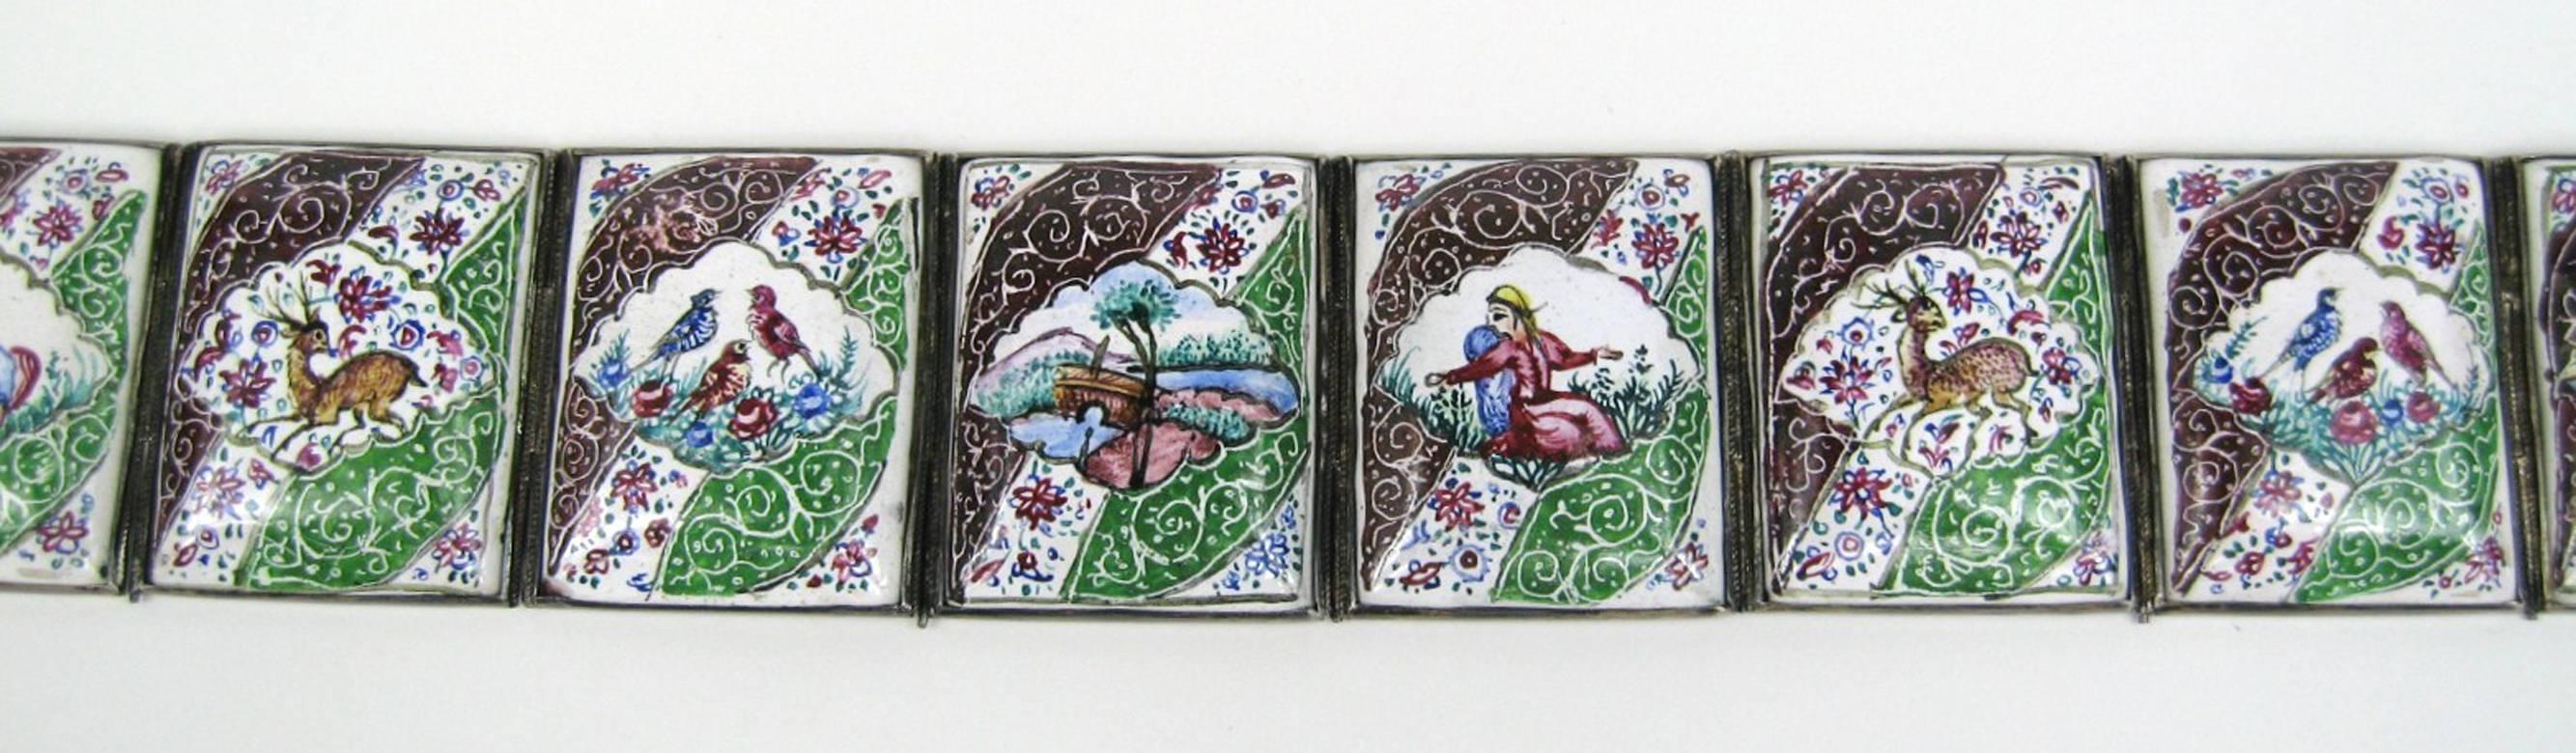  Persian Enamel Belt Hand Painted Indo Art Tile Silver Belt  In Good Condition For Sale In Wallkill, NY